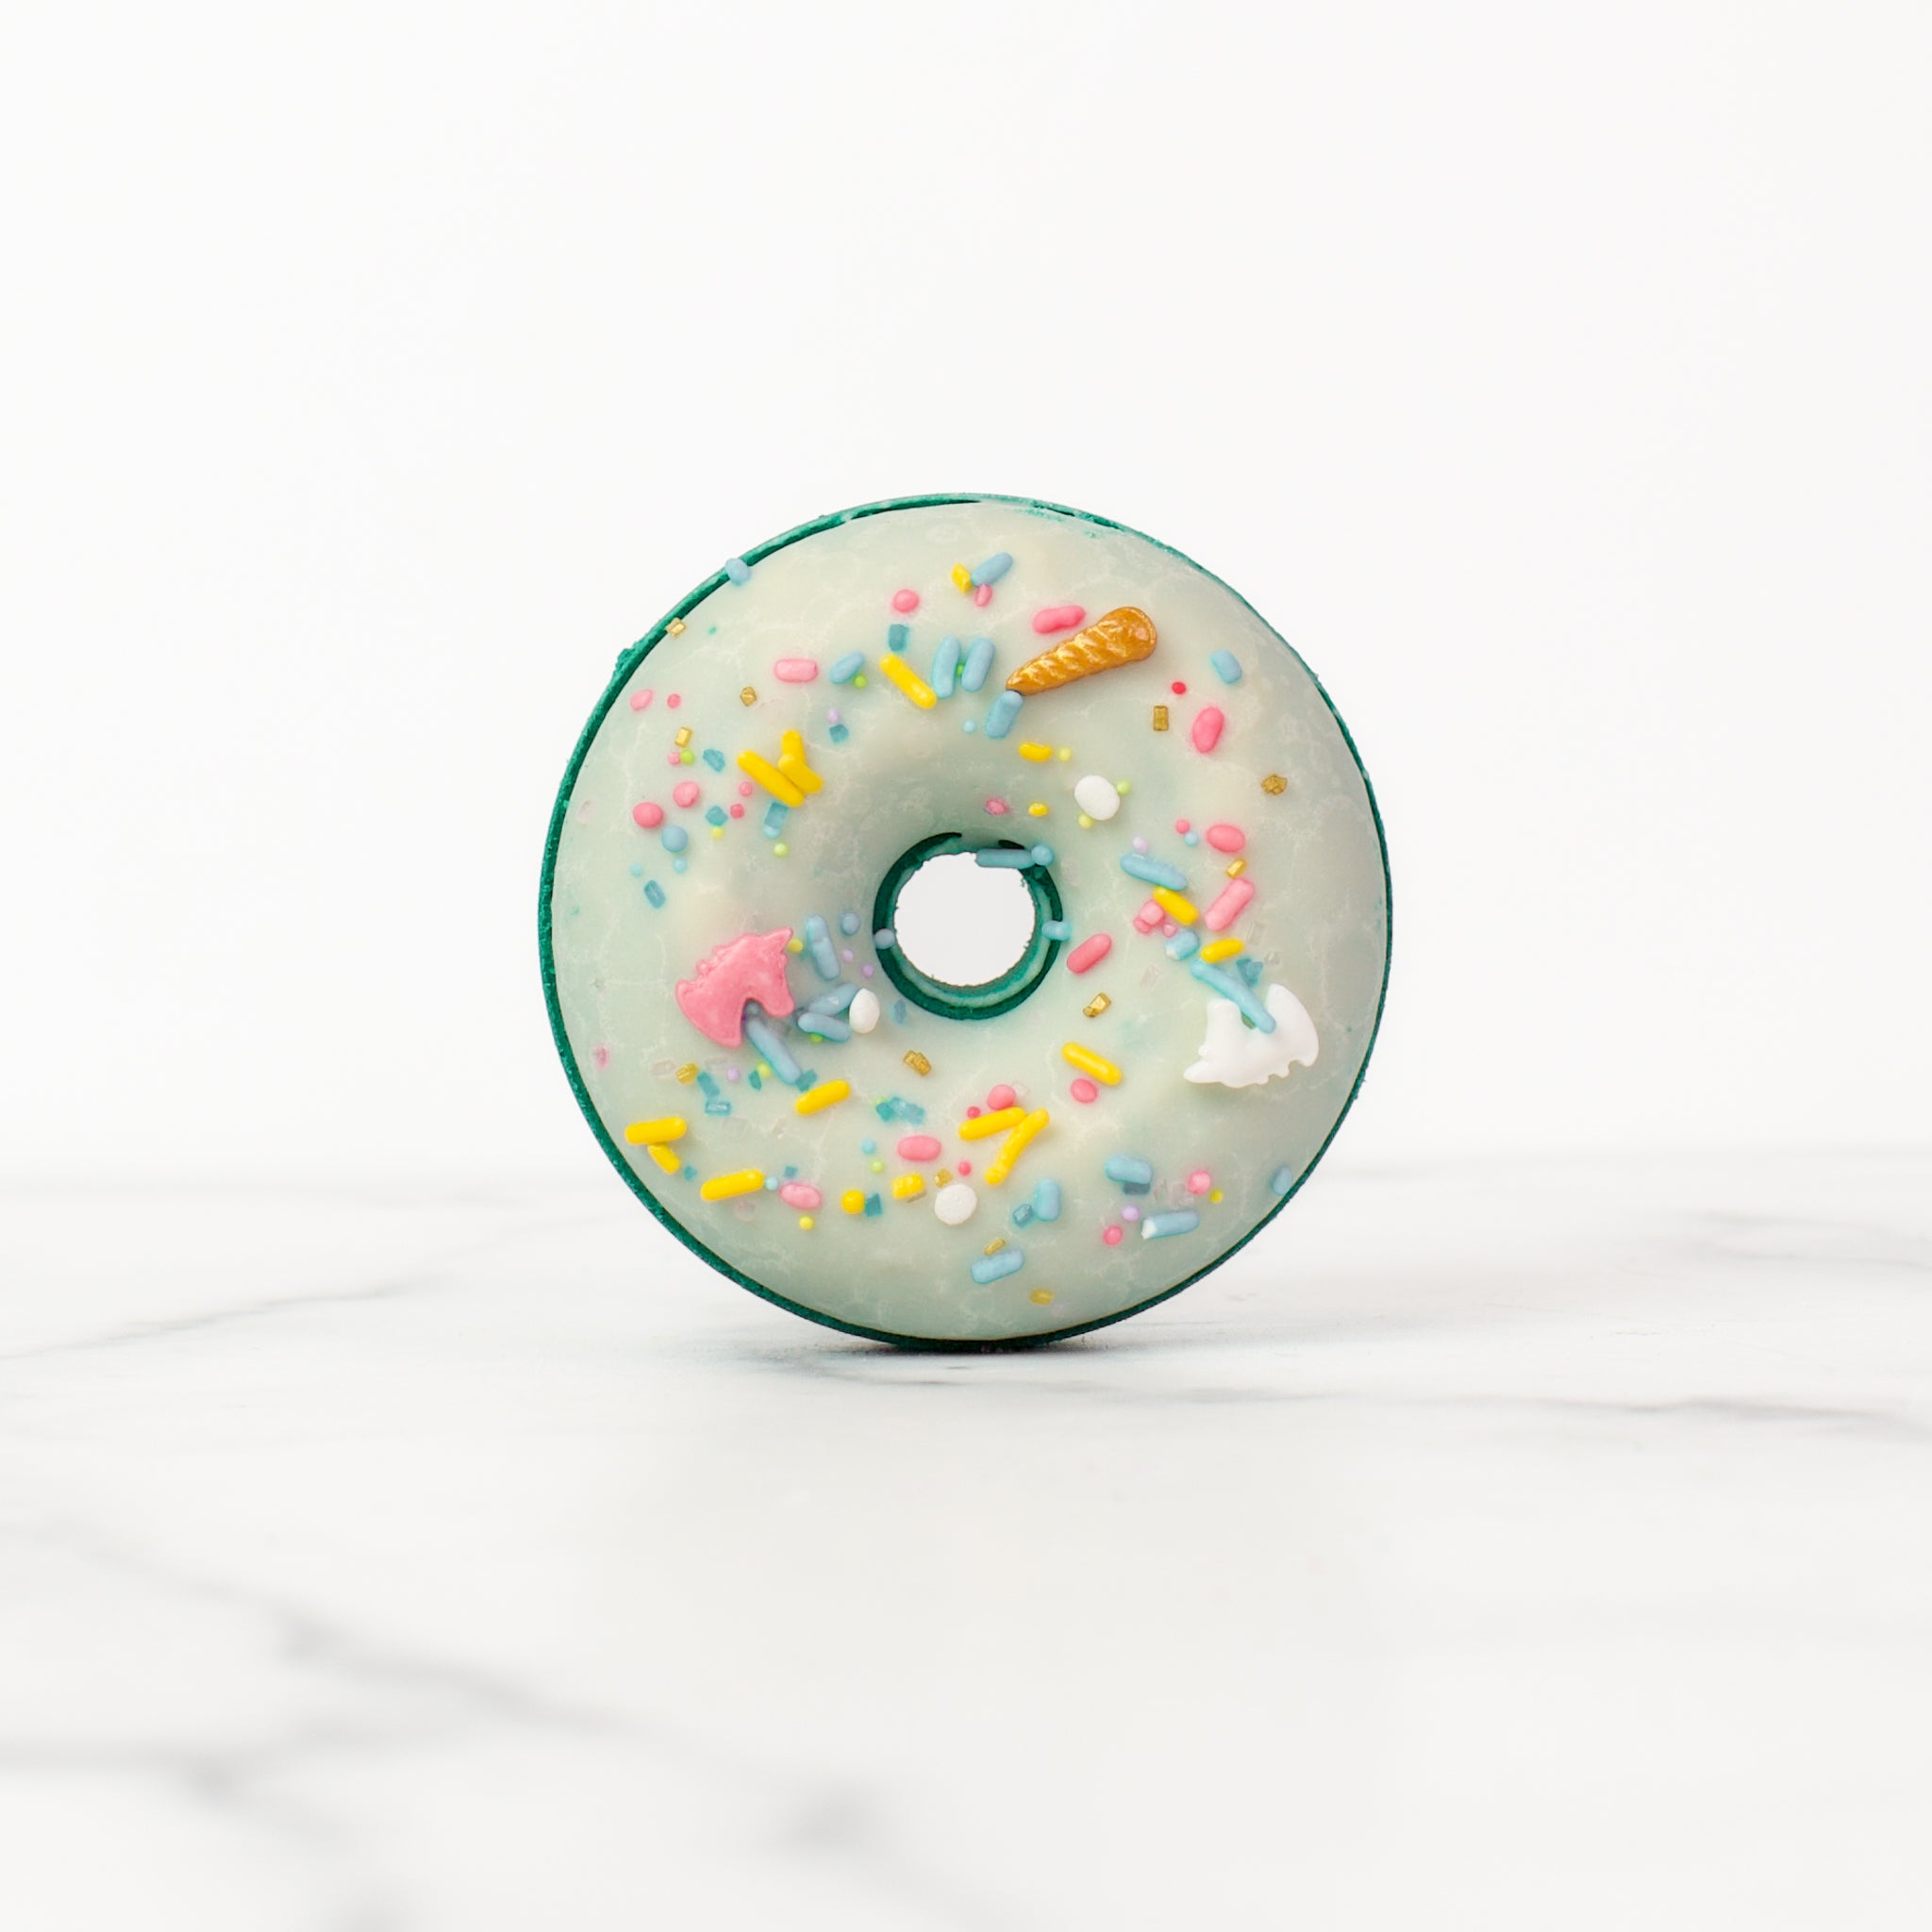 One large donut Volcano bath bombs on a white background. Volcano is a teal bath bomb with a white glaze and pastel unicorn sprinkles.